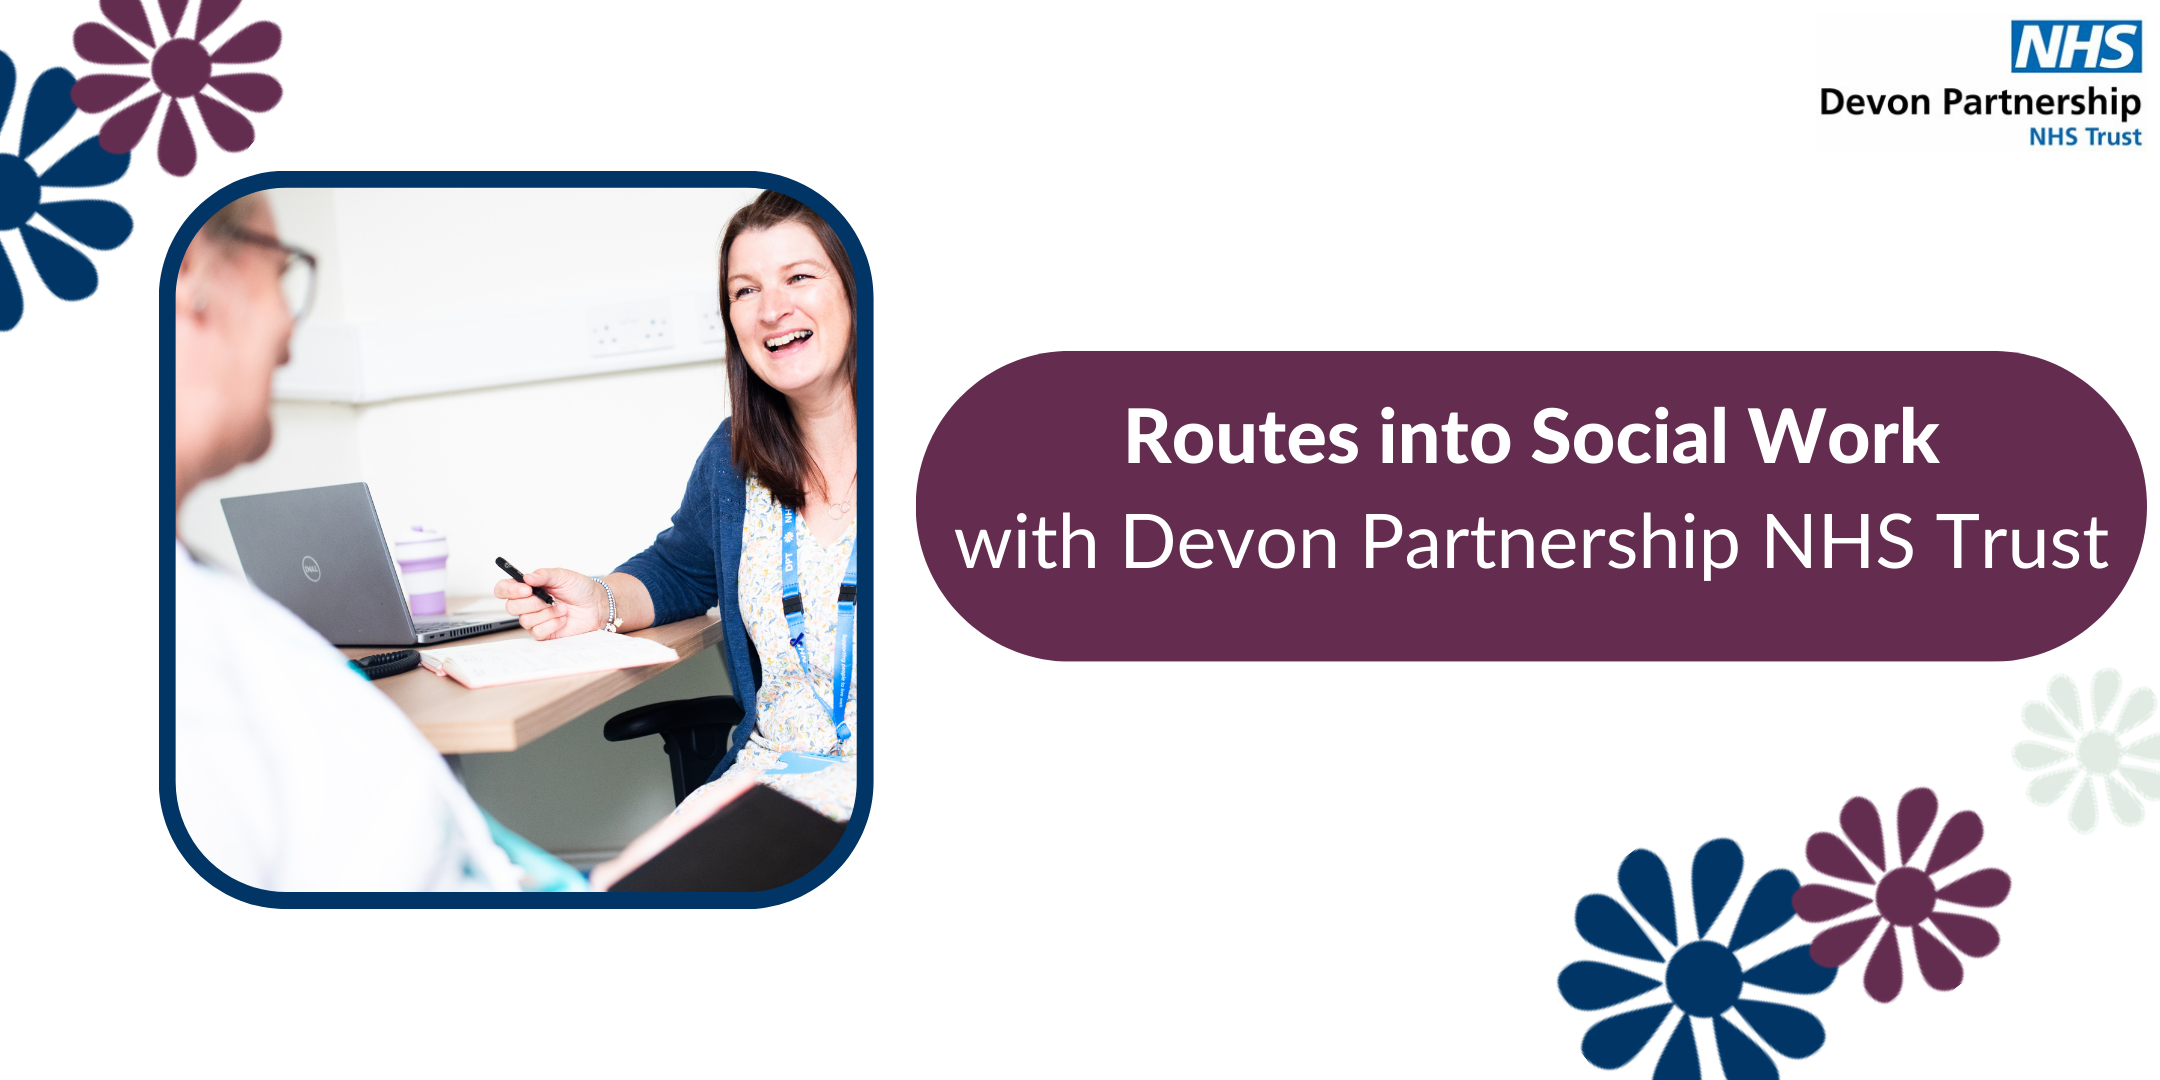 Routes into social work